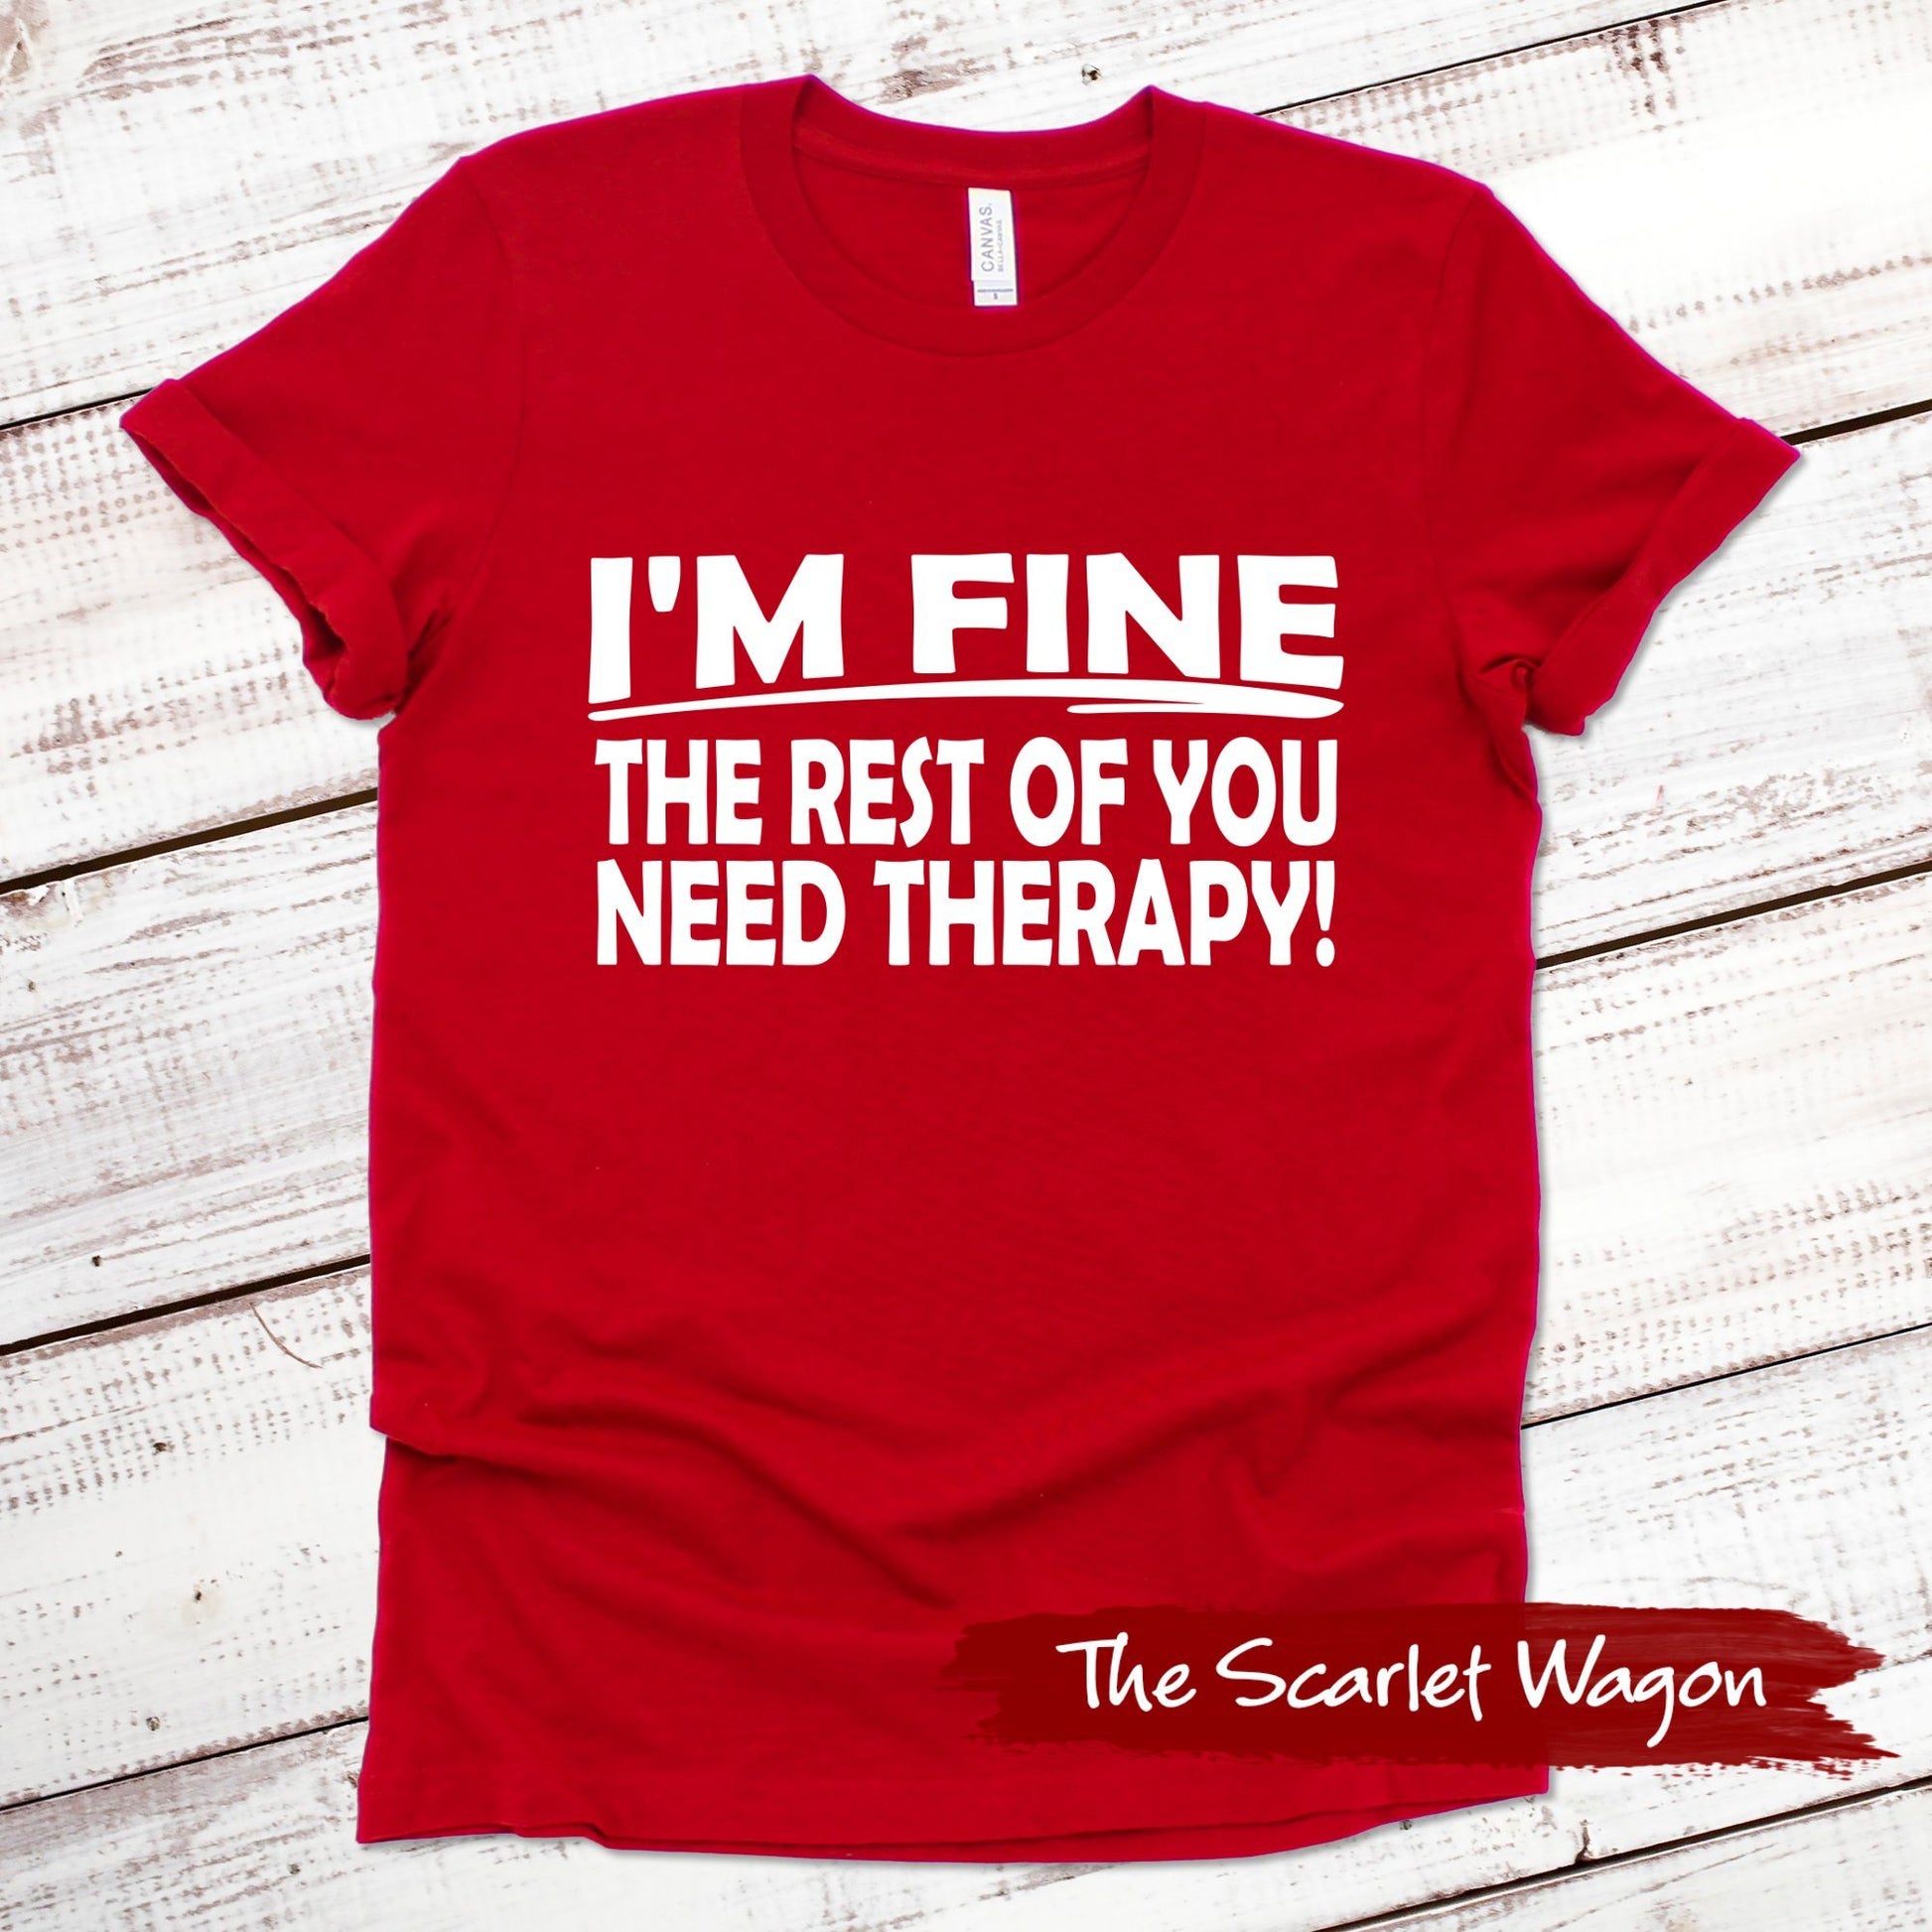 I'm Fine the Rest of You Need Therapy Funny Shirt Scarlet Wagon Red XS 